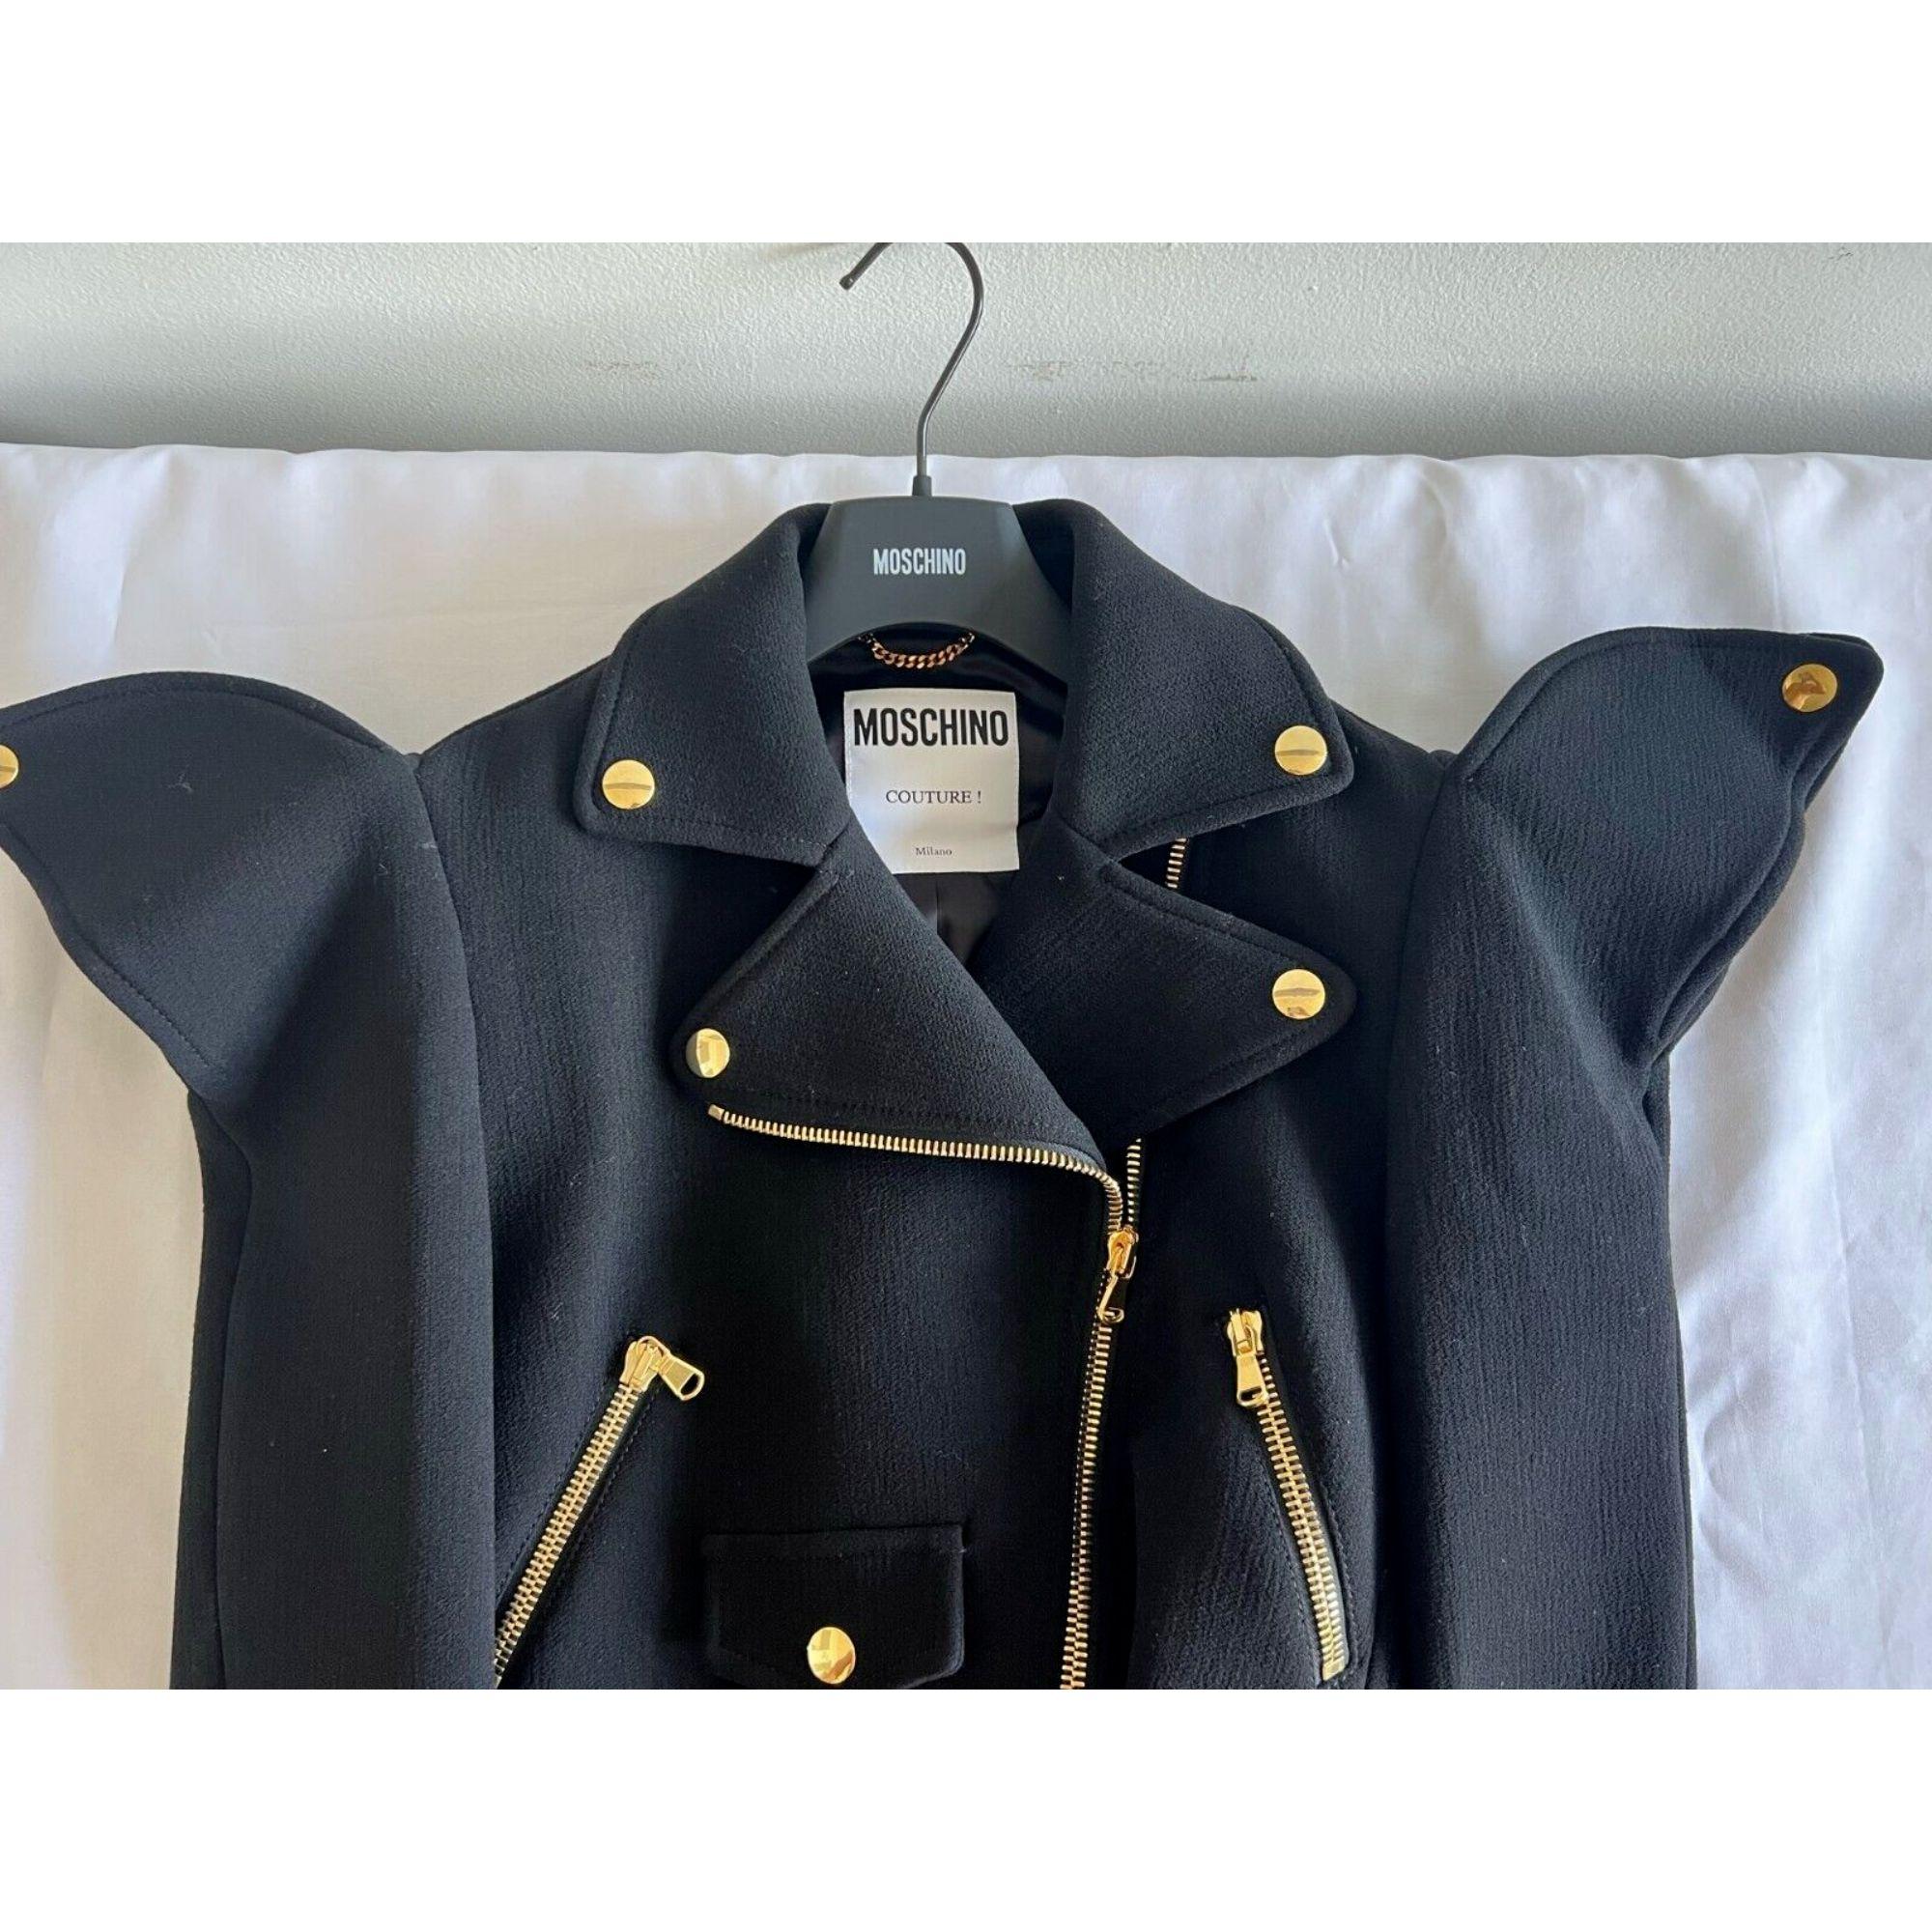 AW21 Moschino Couture Viscose Jacket/Coat with Gold Hardware by Jeremy Scott For Sale 6